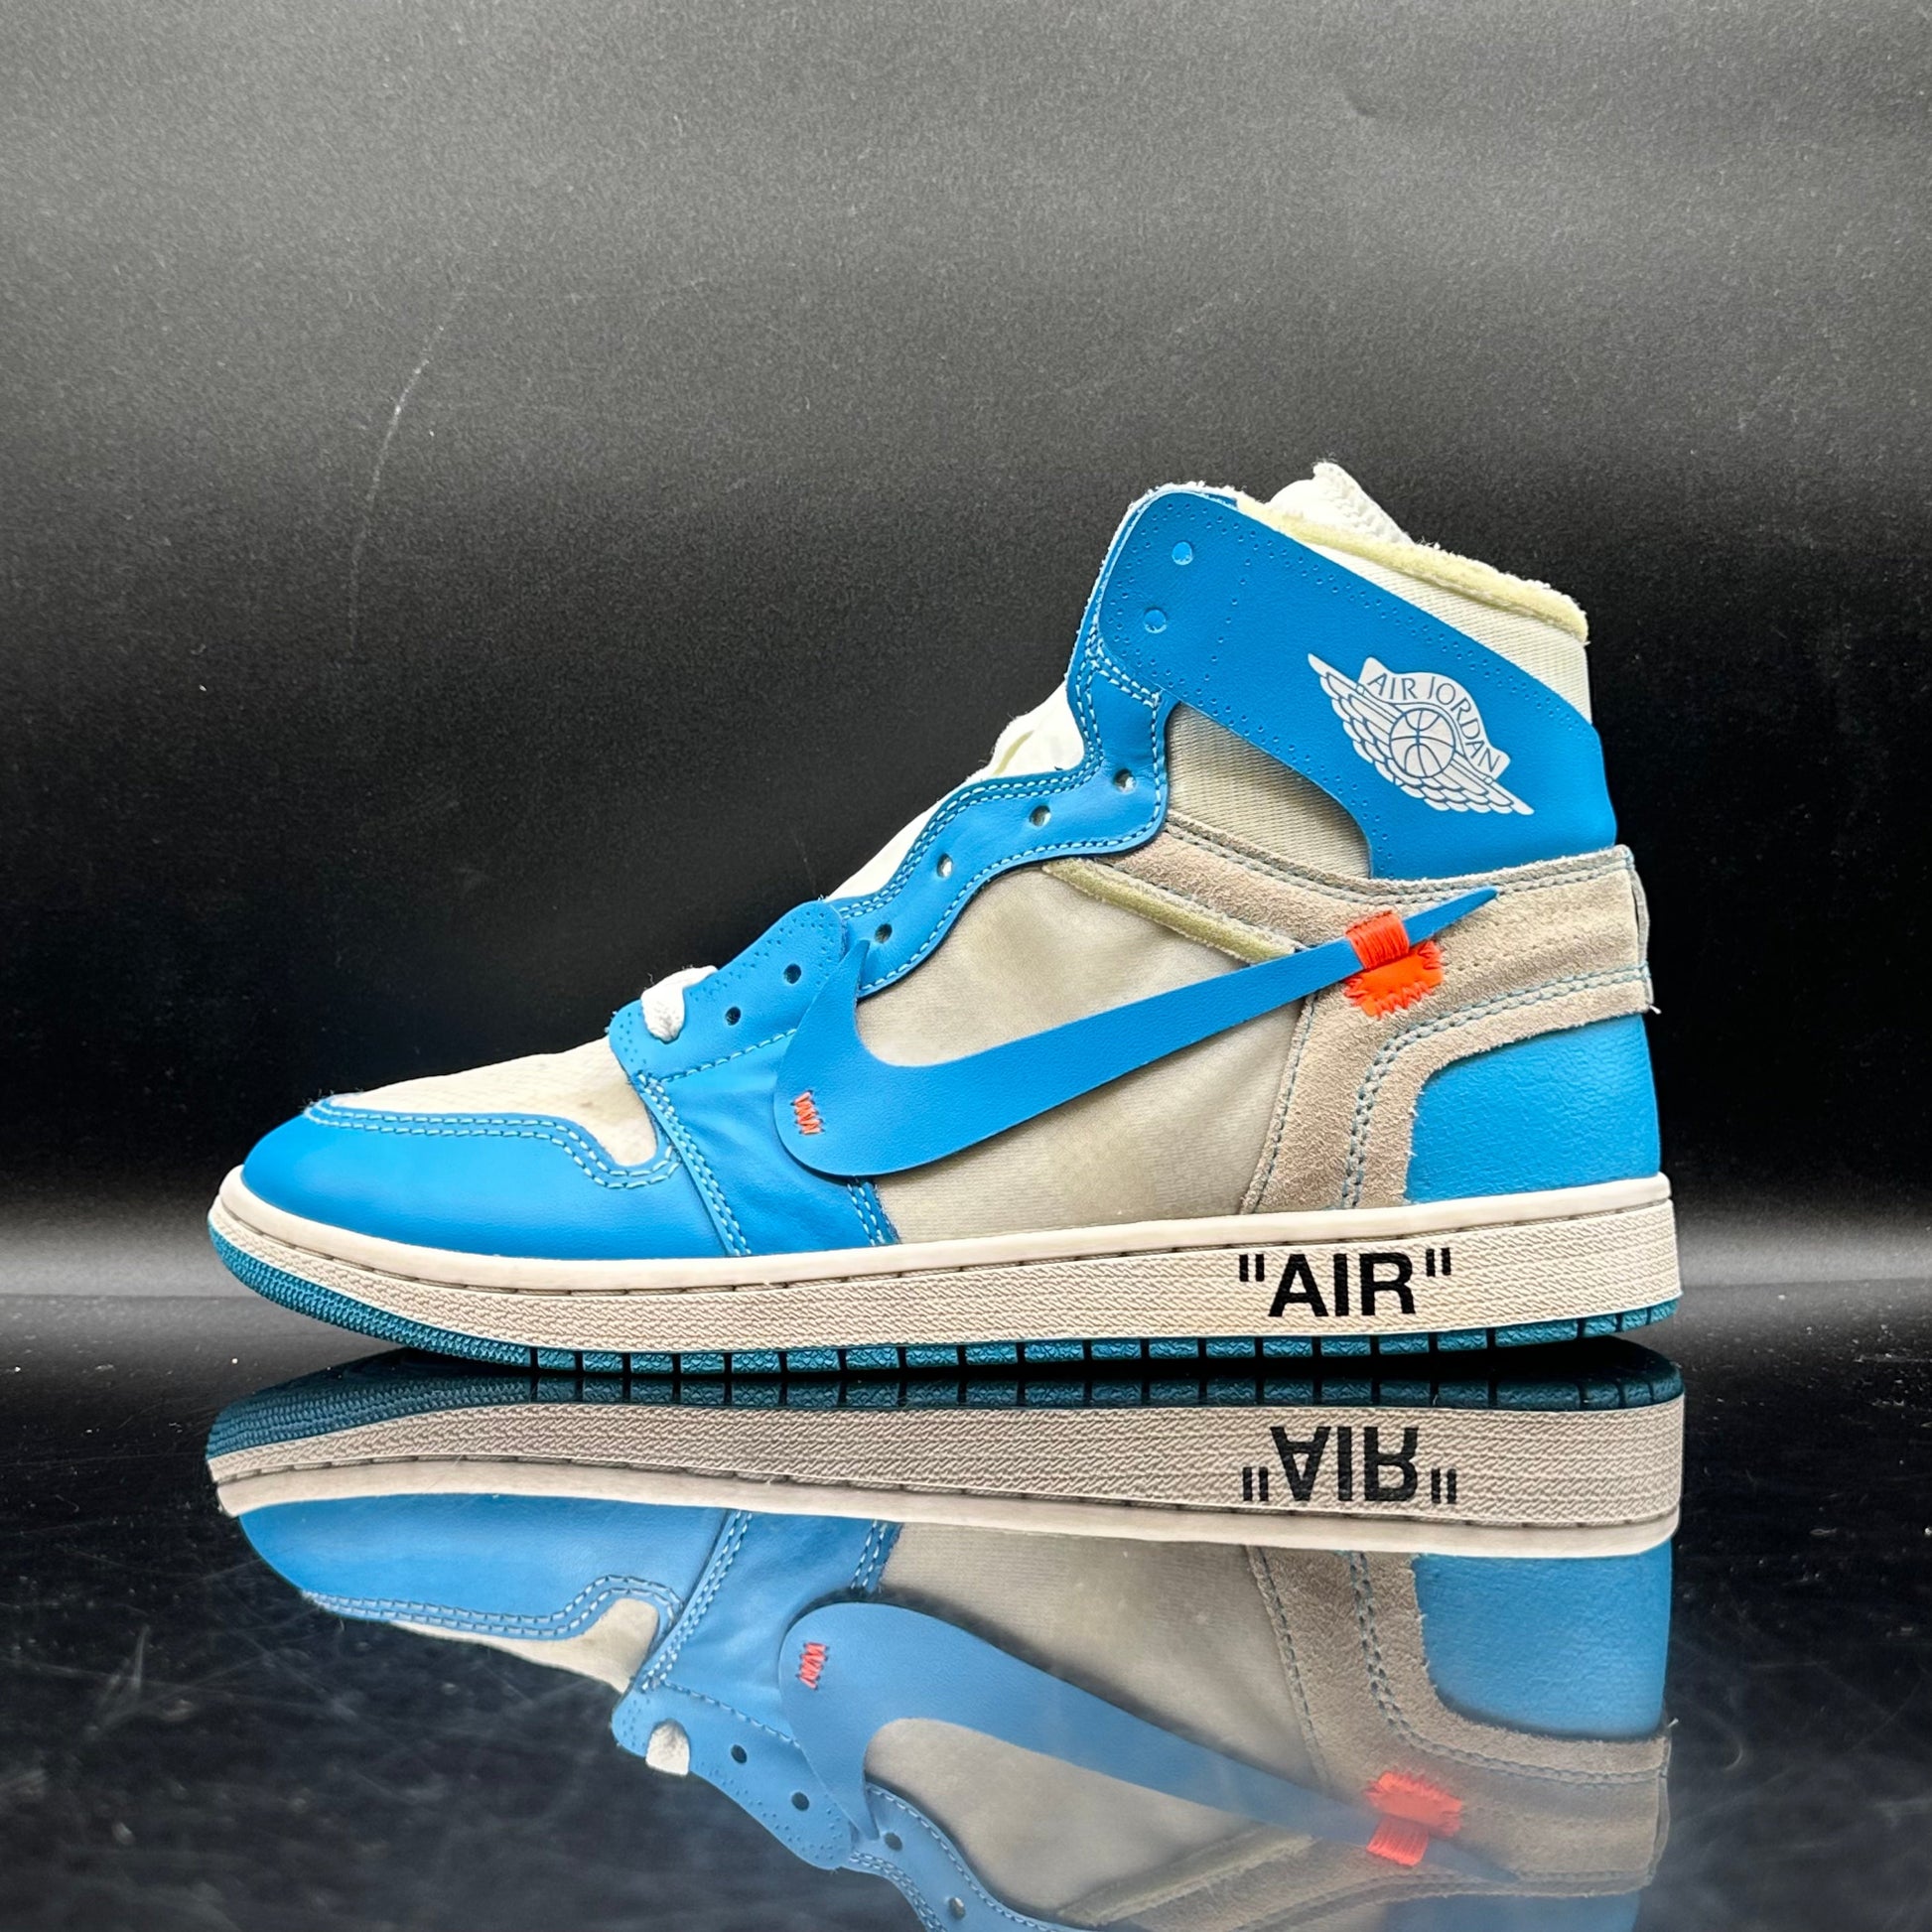 Off White Jordan 1s, Which One Is Your Favorite? UNC And Chicago Size 9.5  Pre Owned Euro Size 9.5